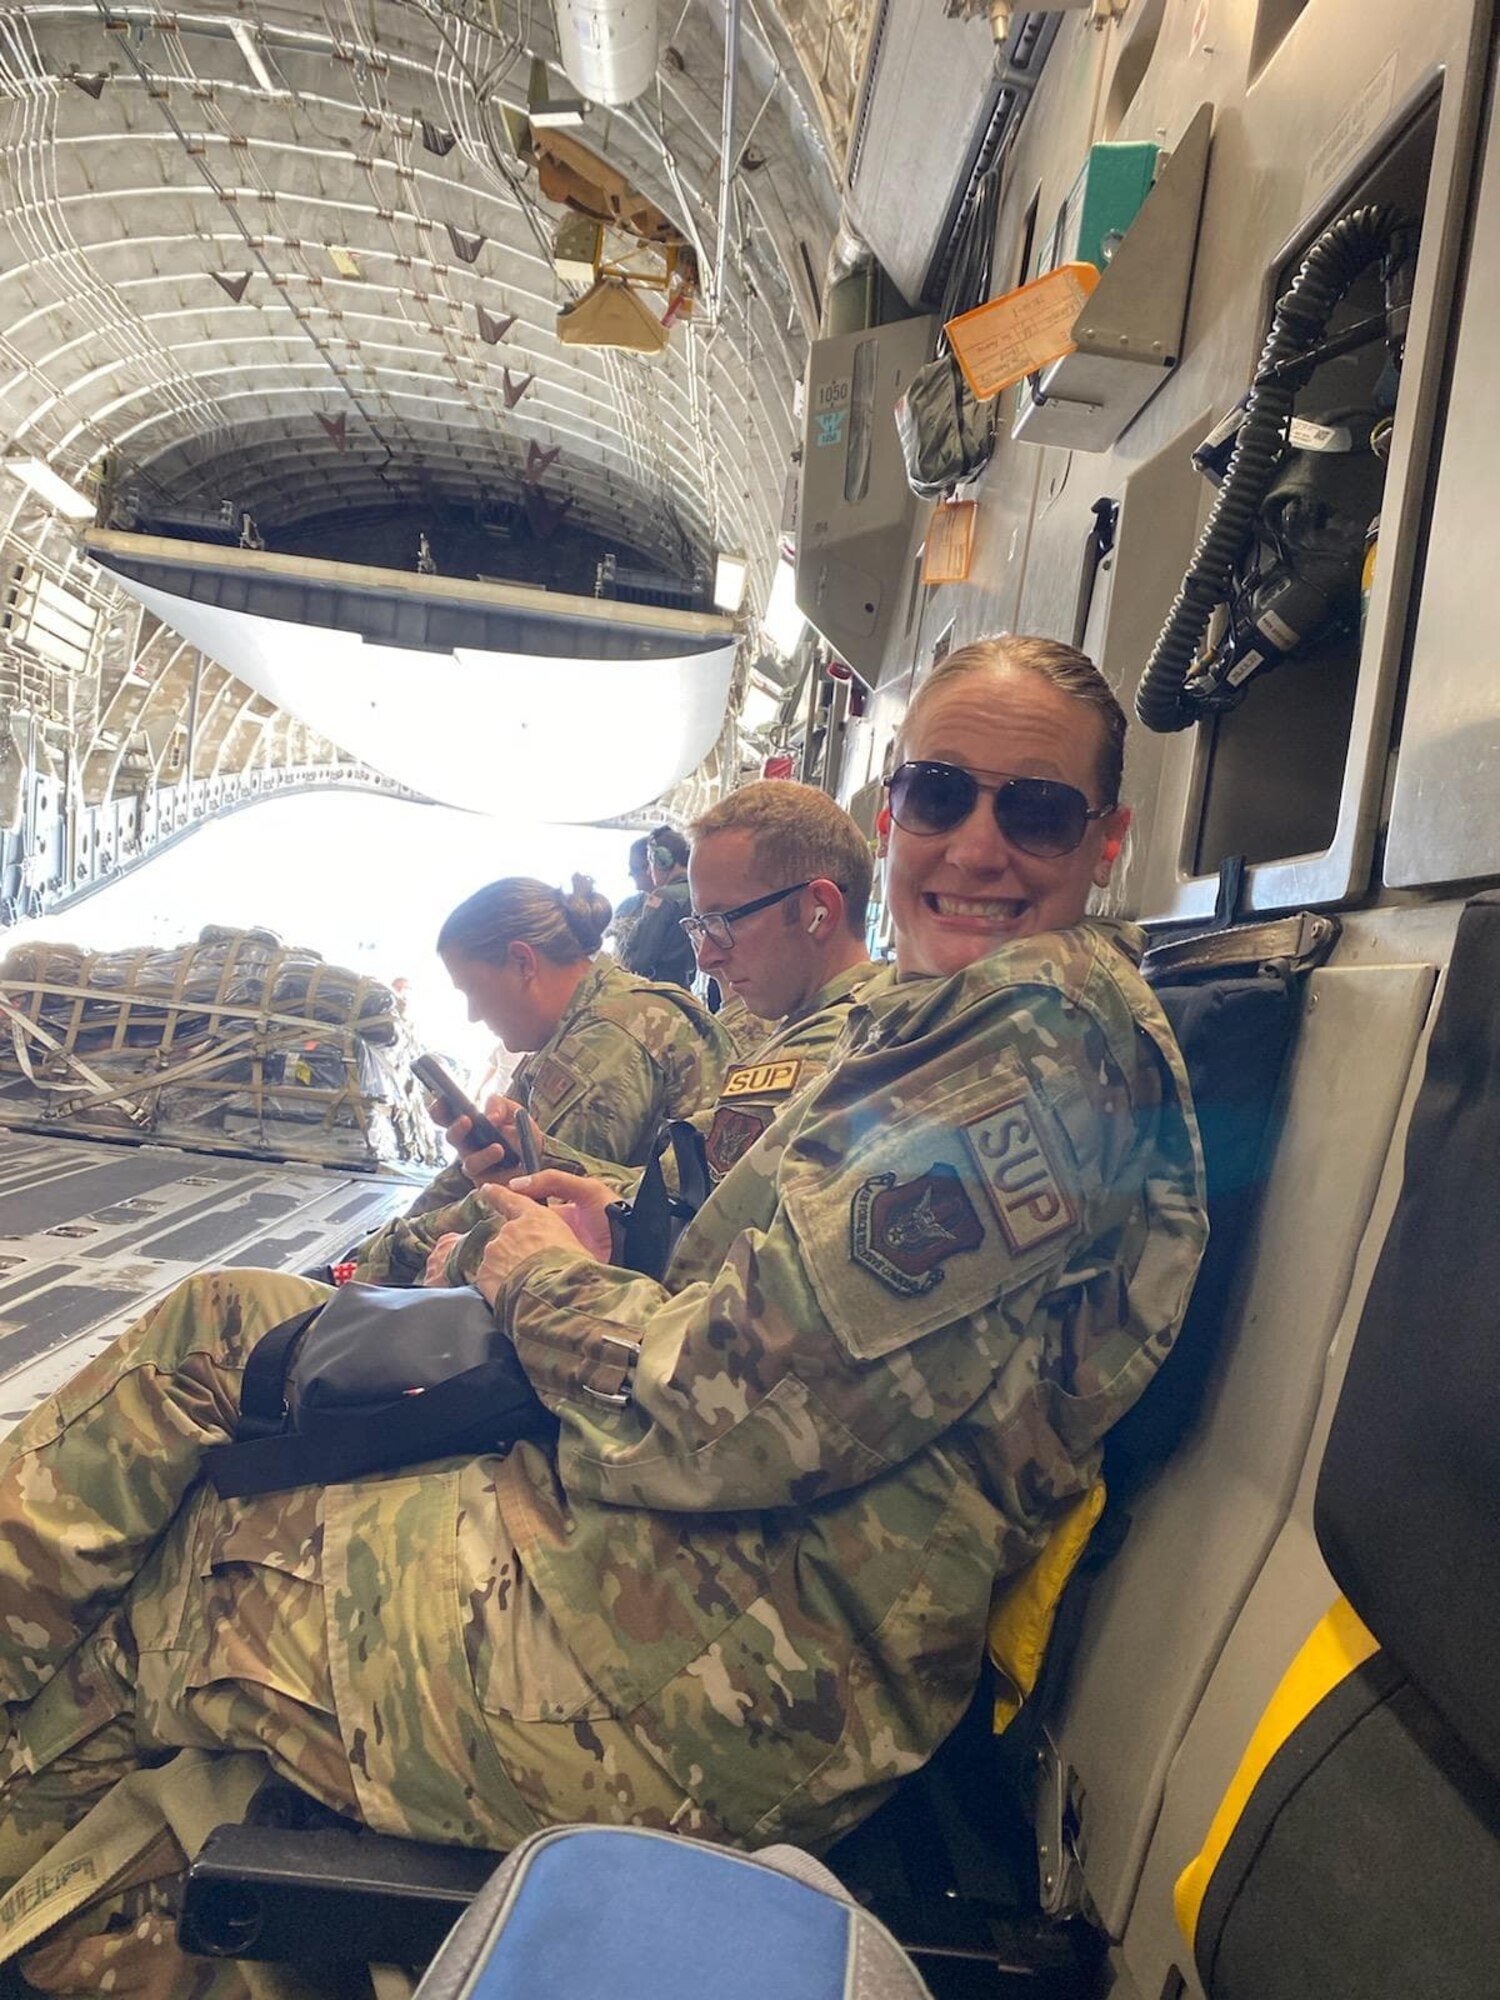 A woman in camouflage and aviator sunglasses smiles at the camera in the back of a cargo aircraft.